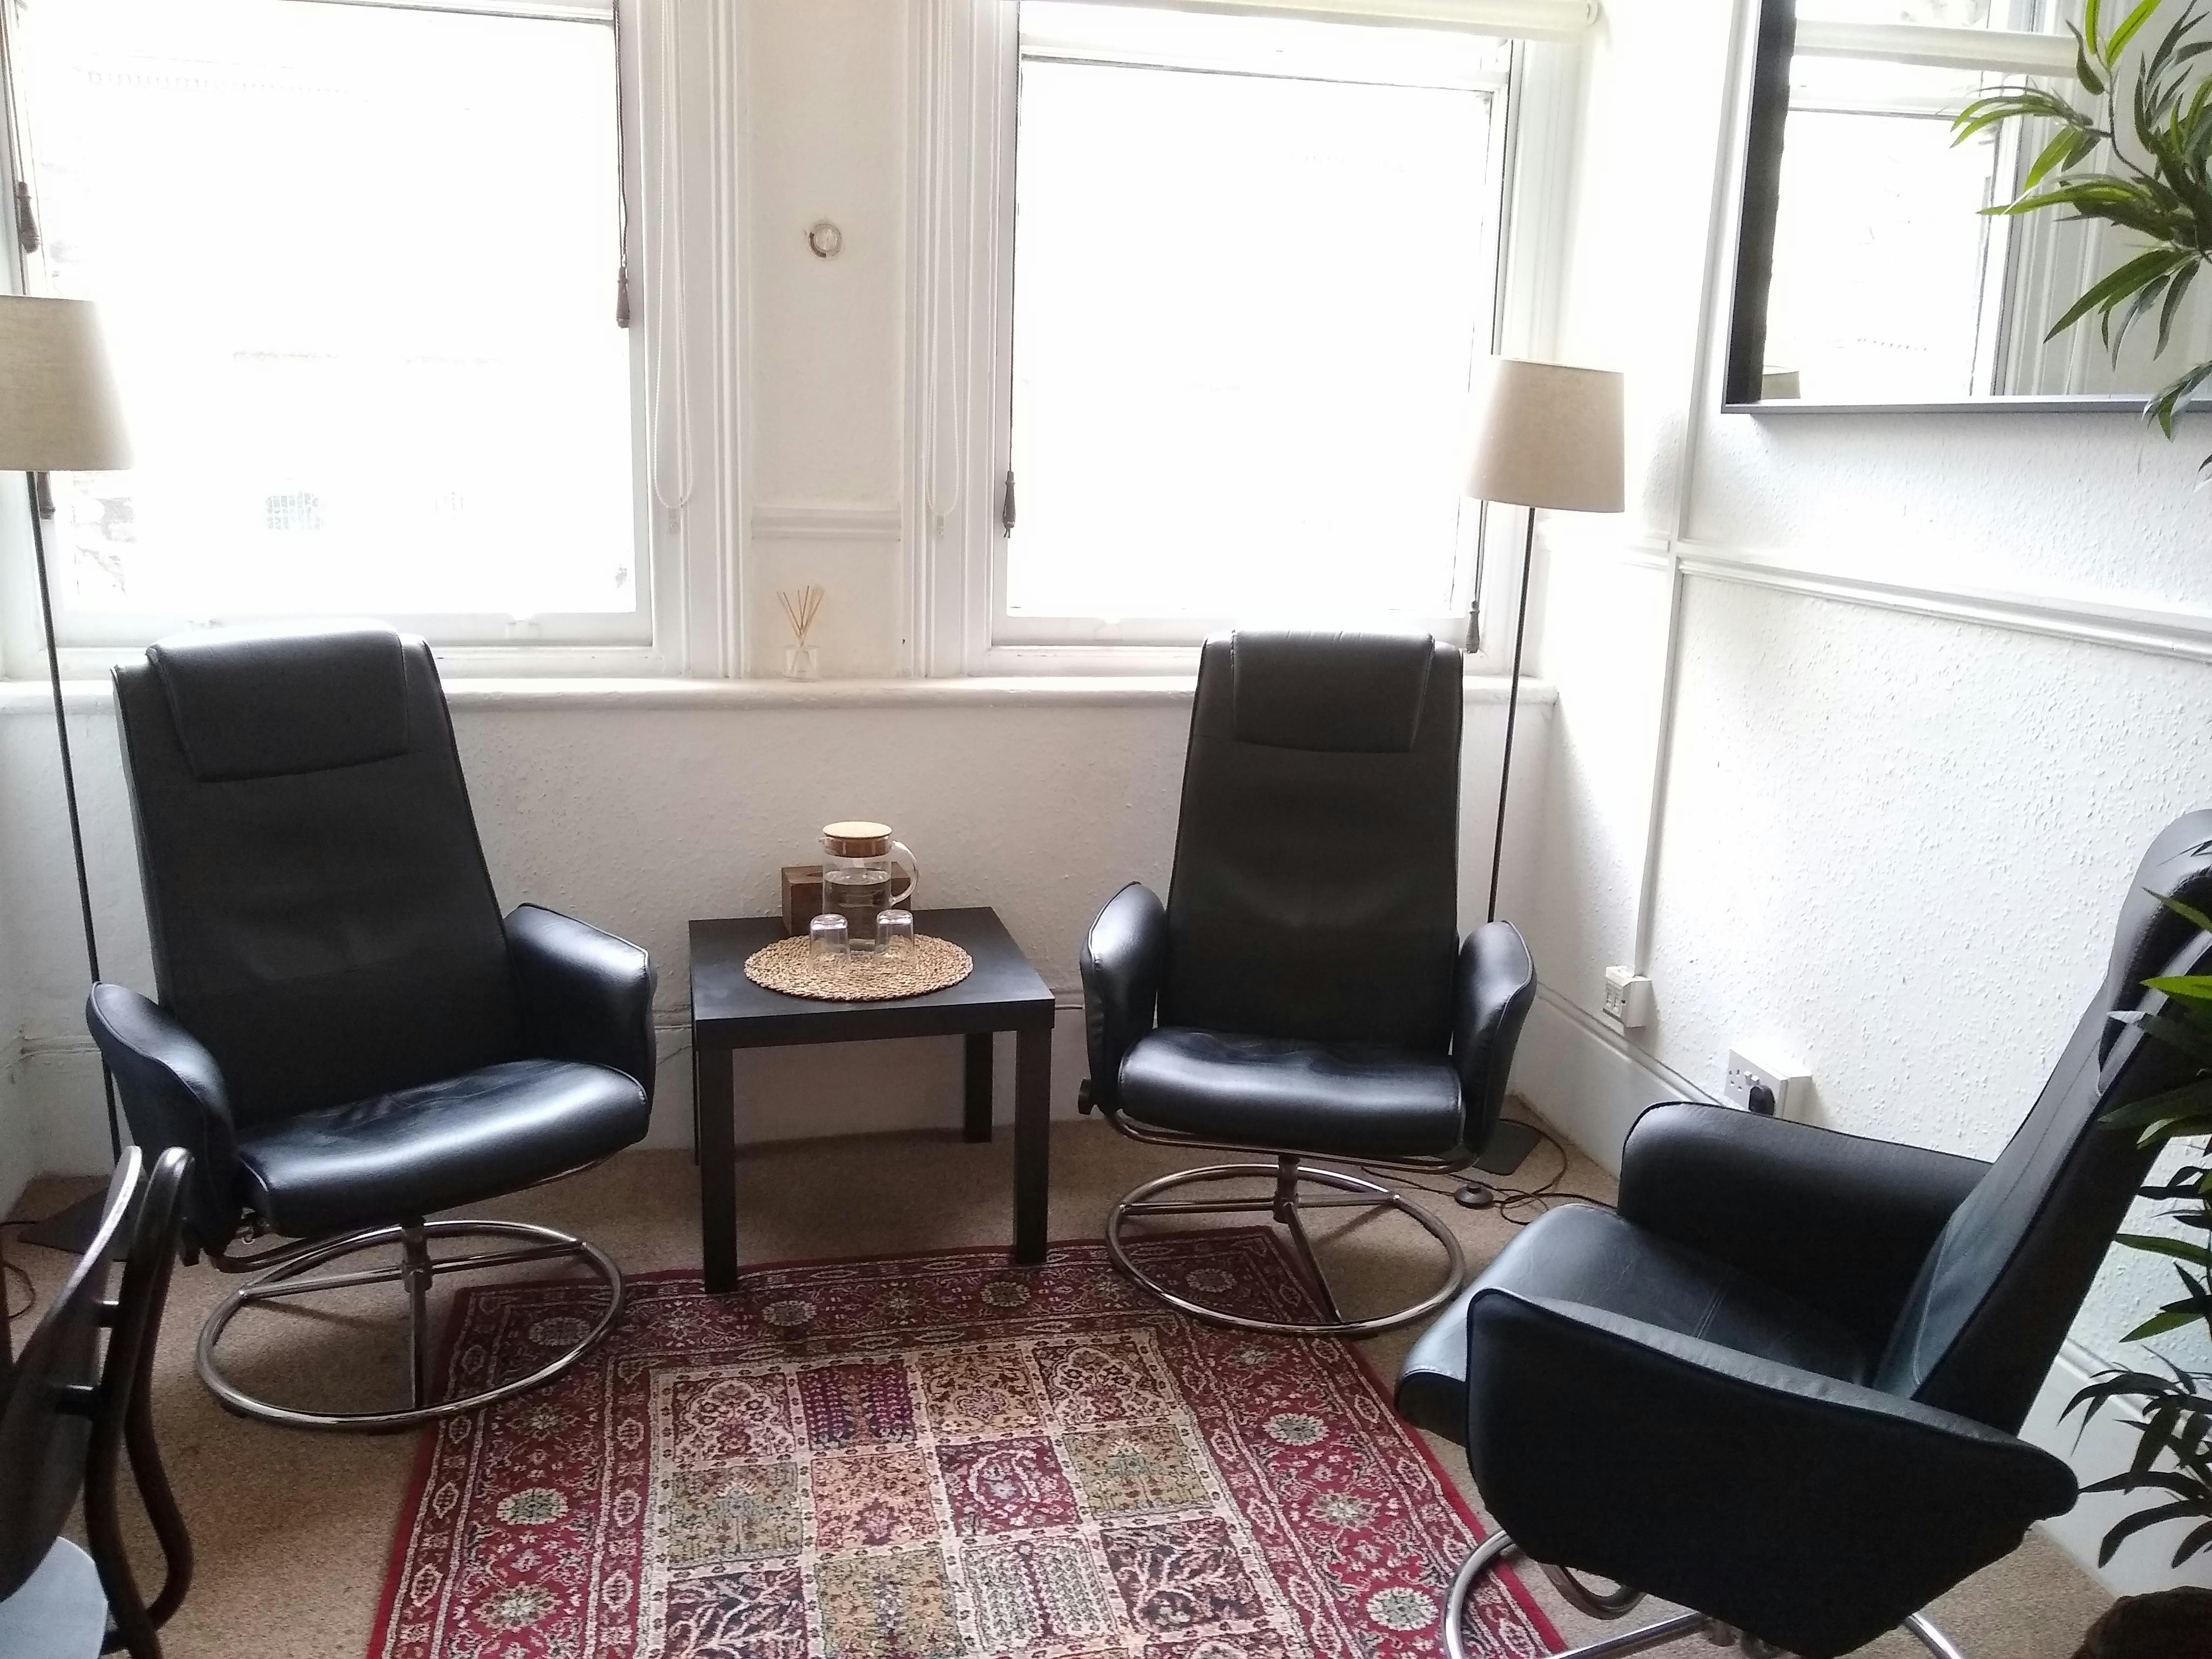 Therapy Rooms Venues in London - The Harley Street Therapy Centre